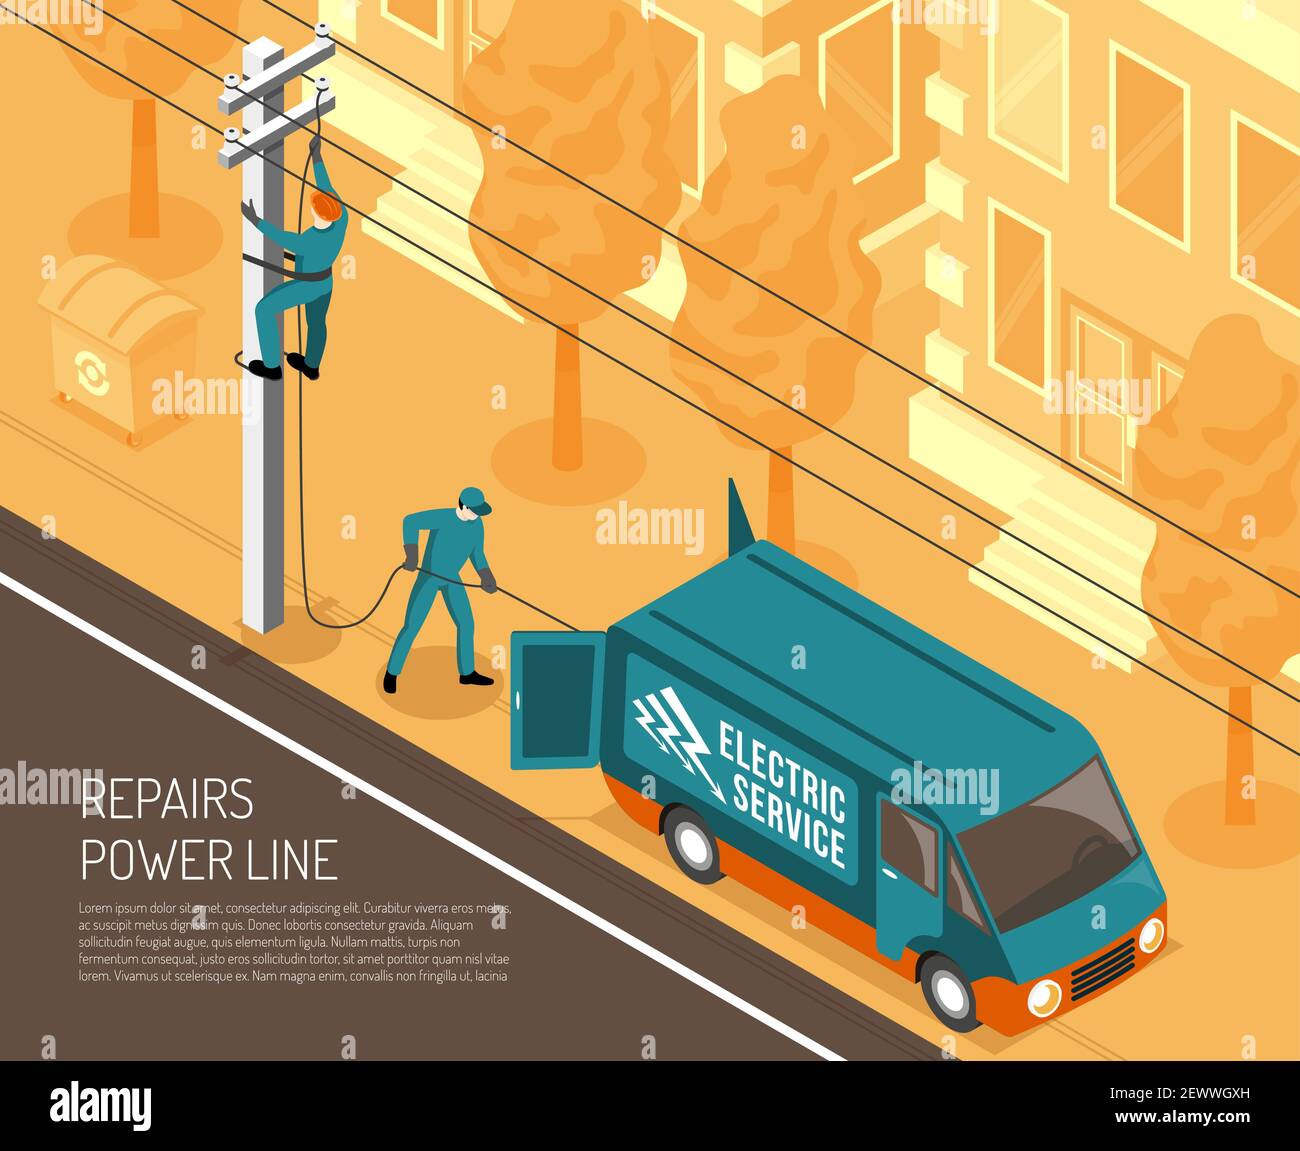 Isometric electrician background with view of city street and power line being repaired by two linemen vector illustration Stock Vector